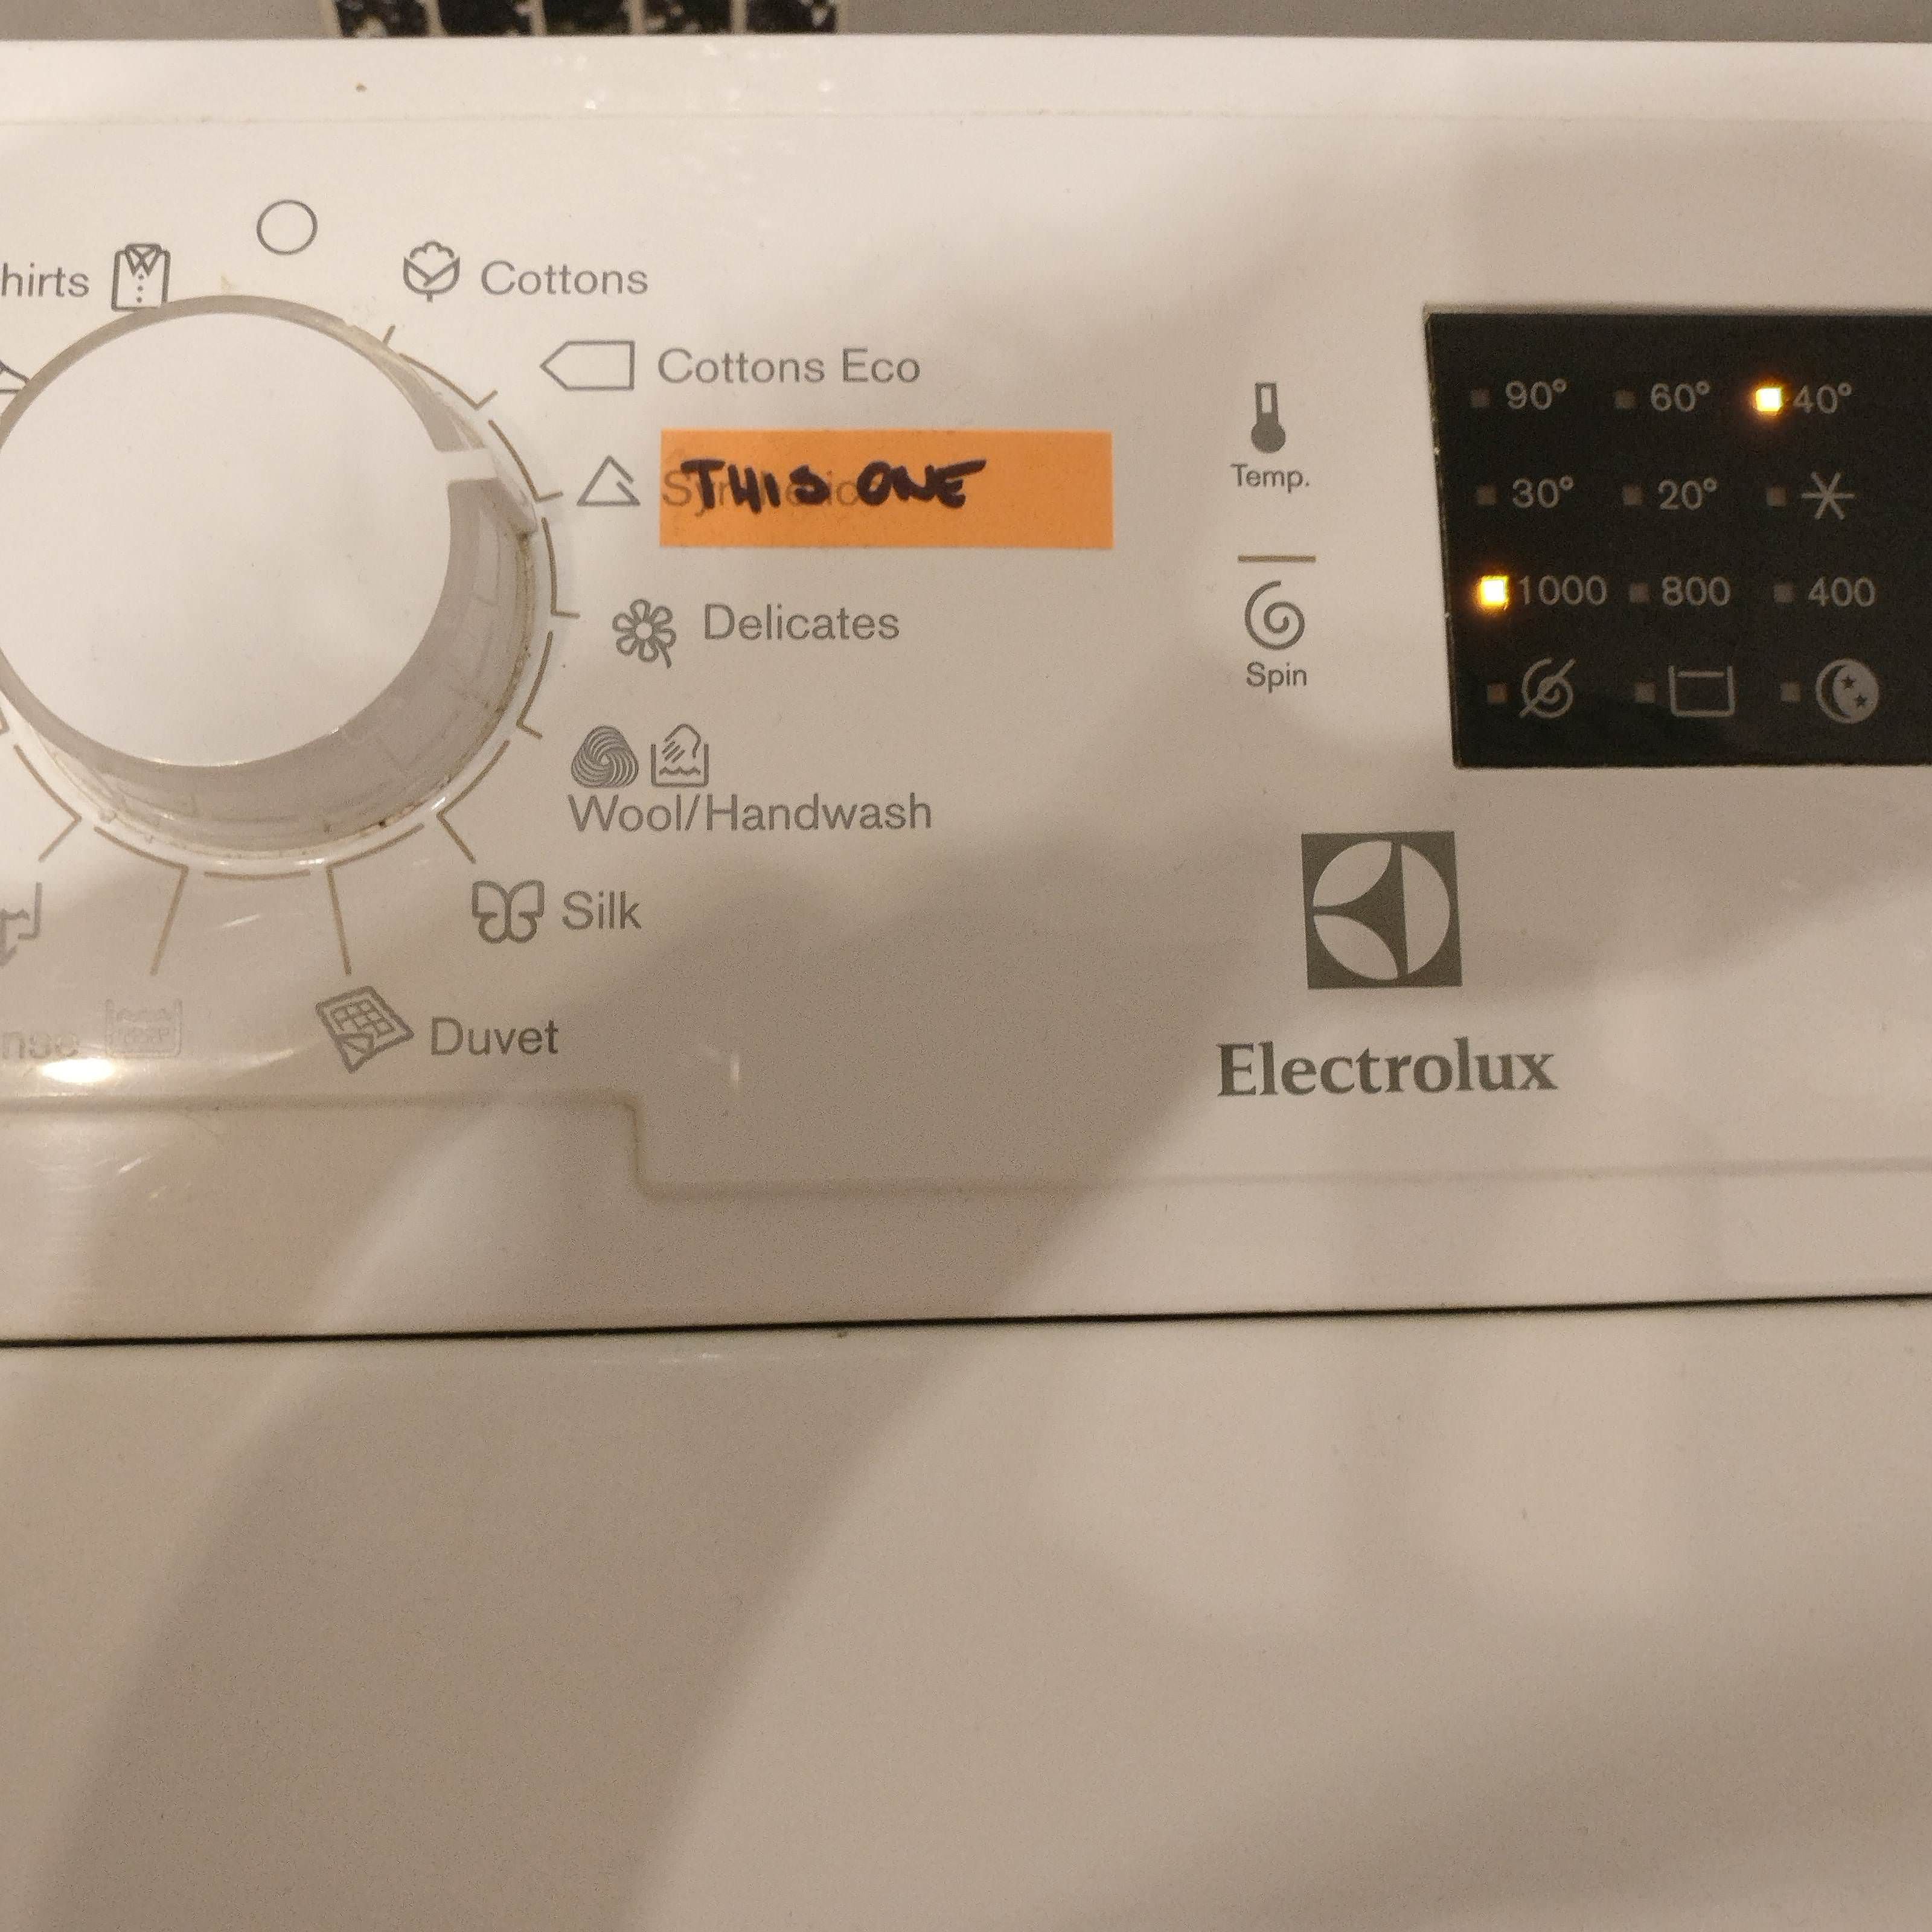 I can code in multiple languages, but i don't understand washing machines, so my girlfriend made it easier